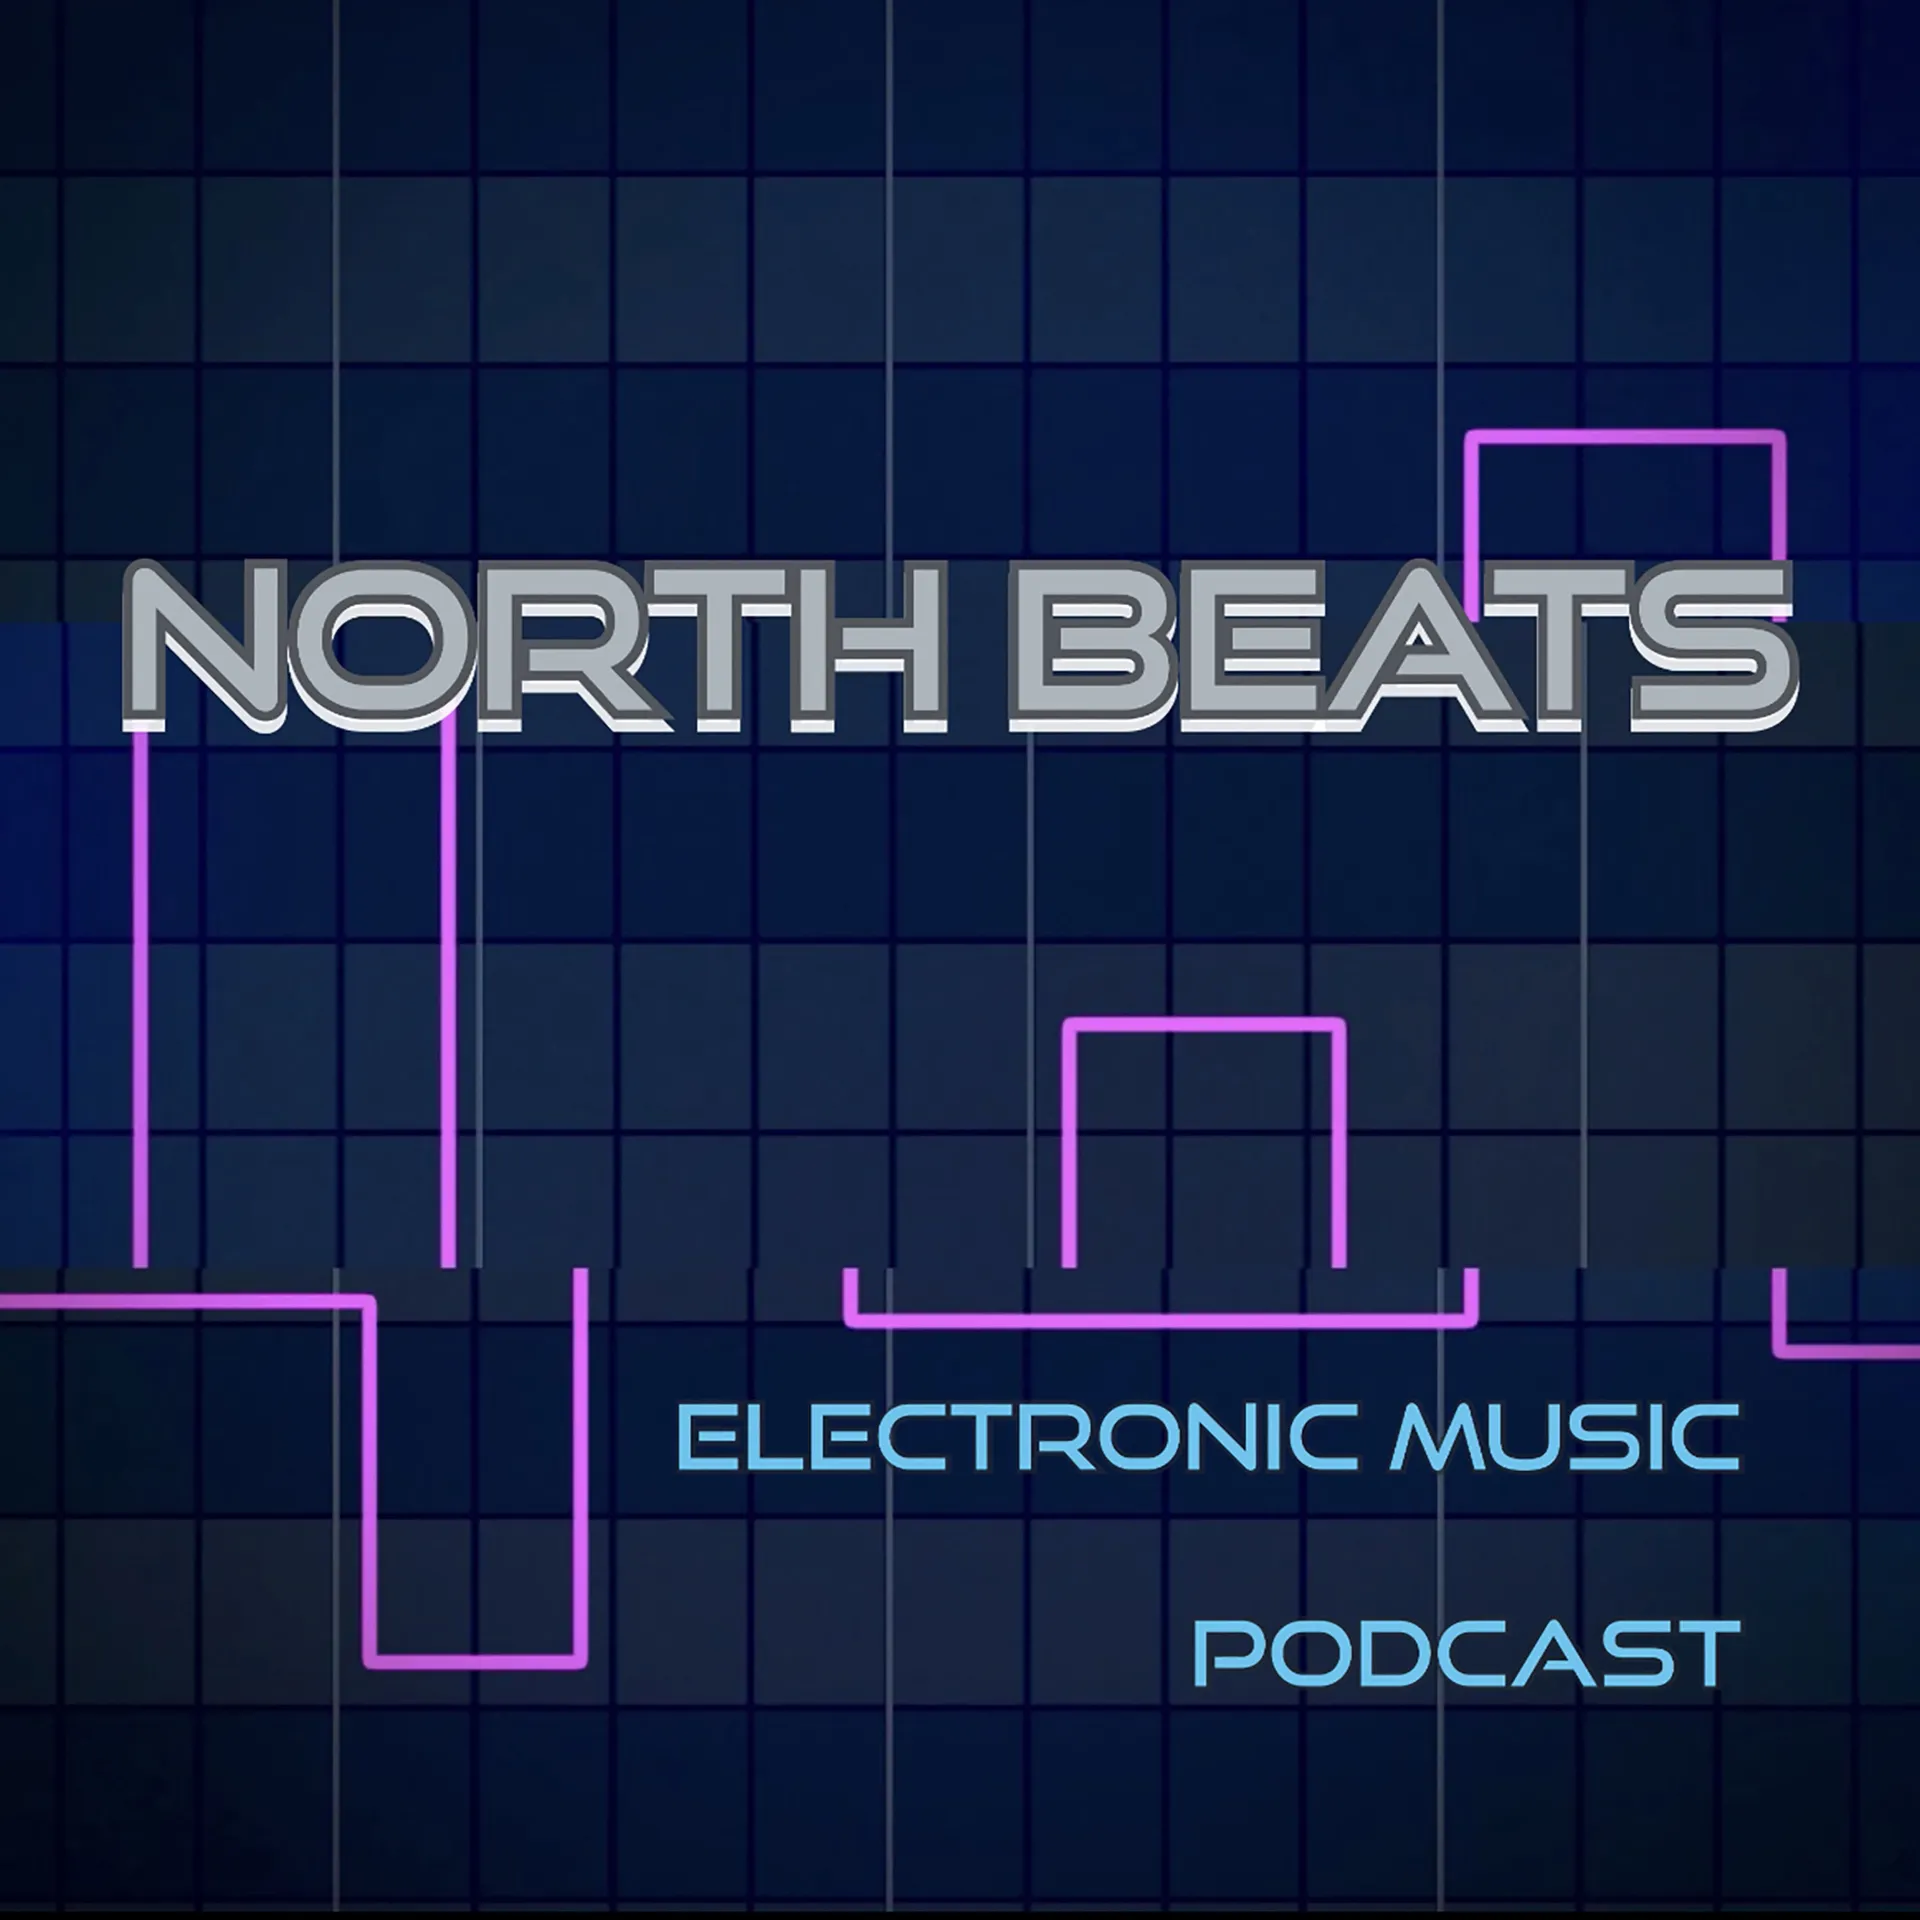 Droid Zen interview on North Beats podcast